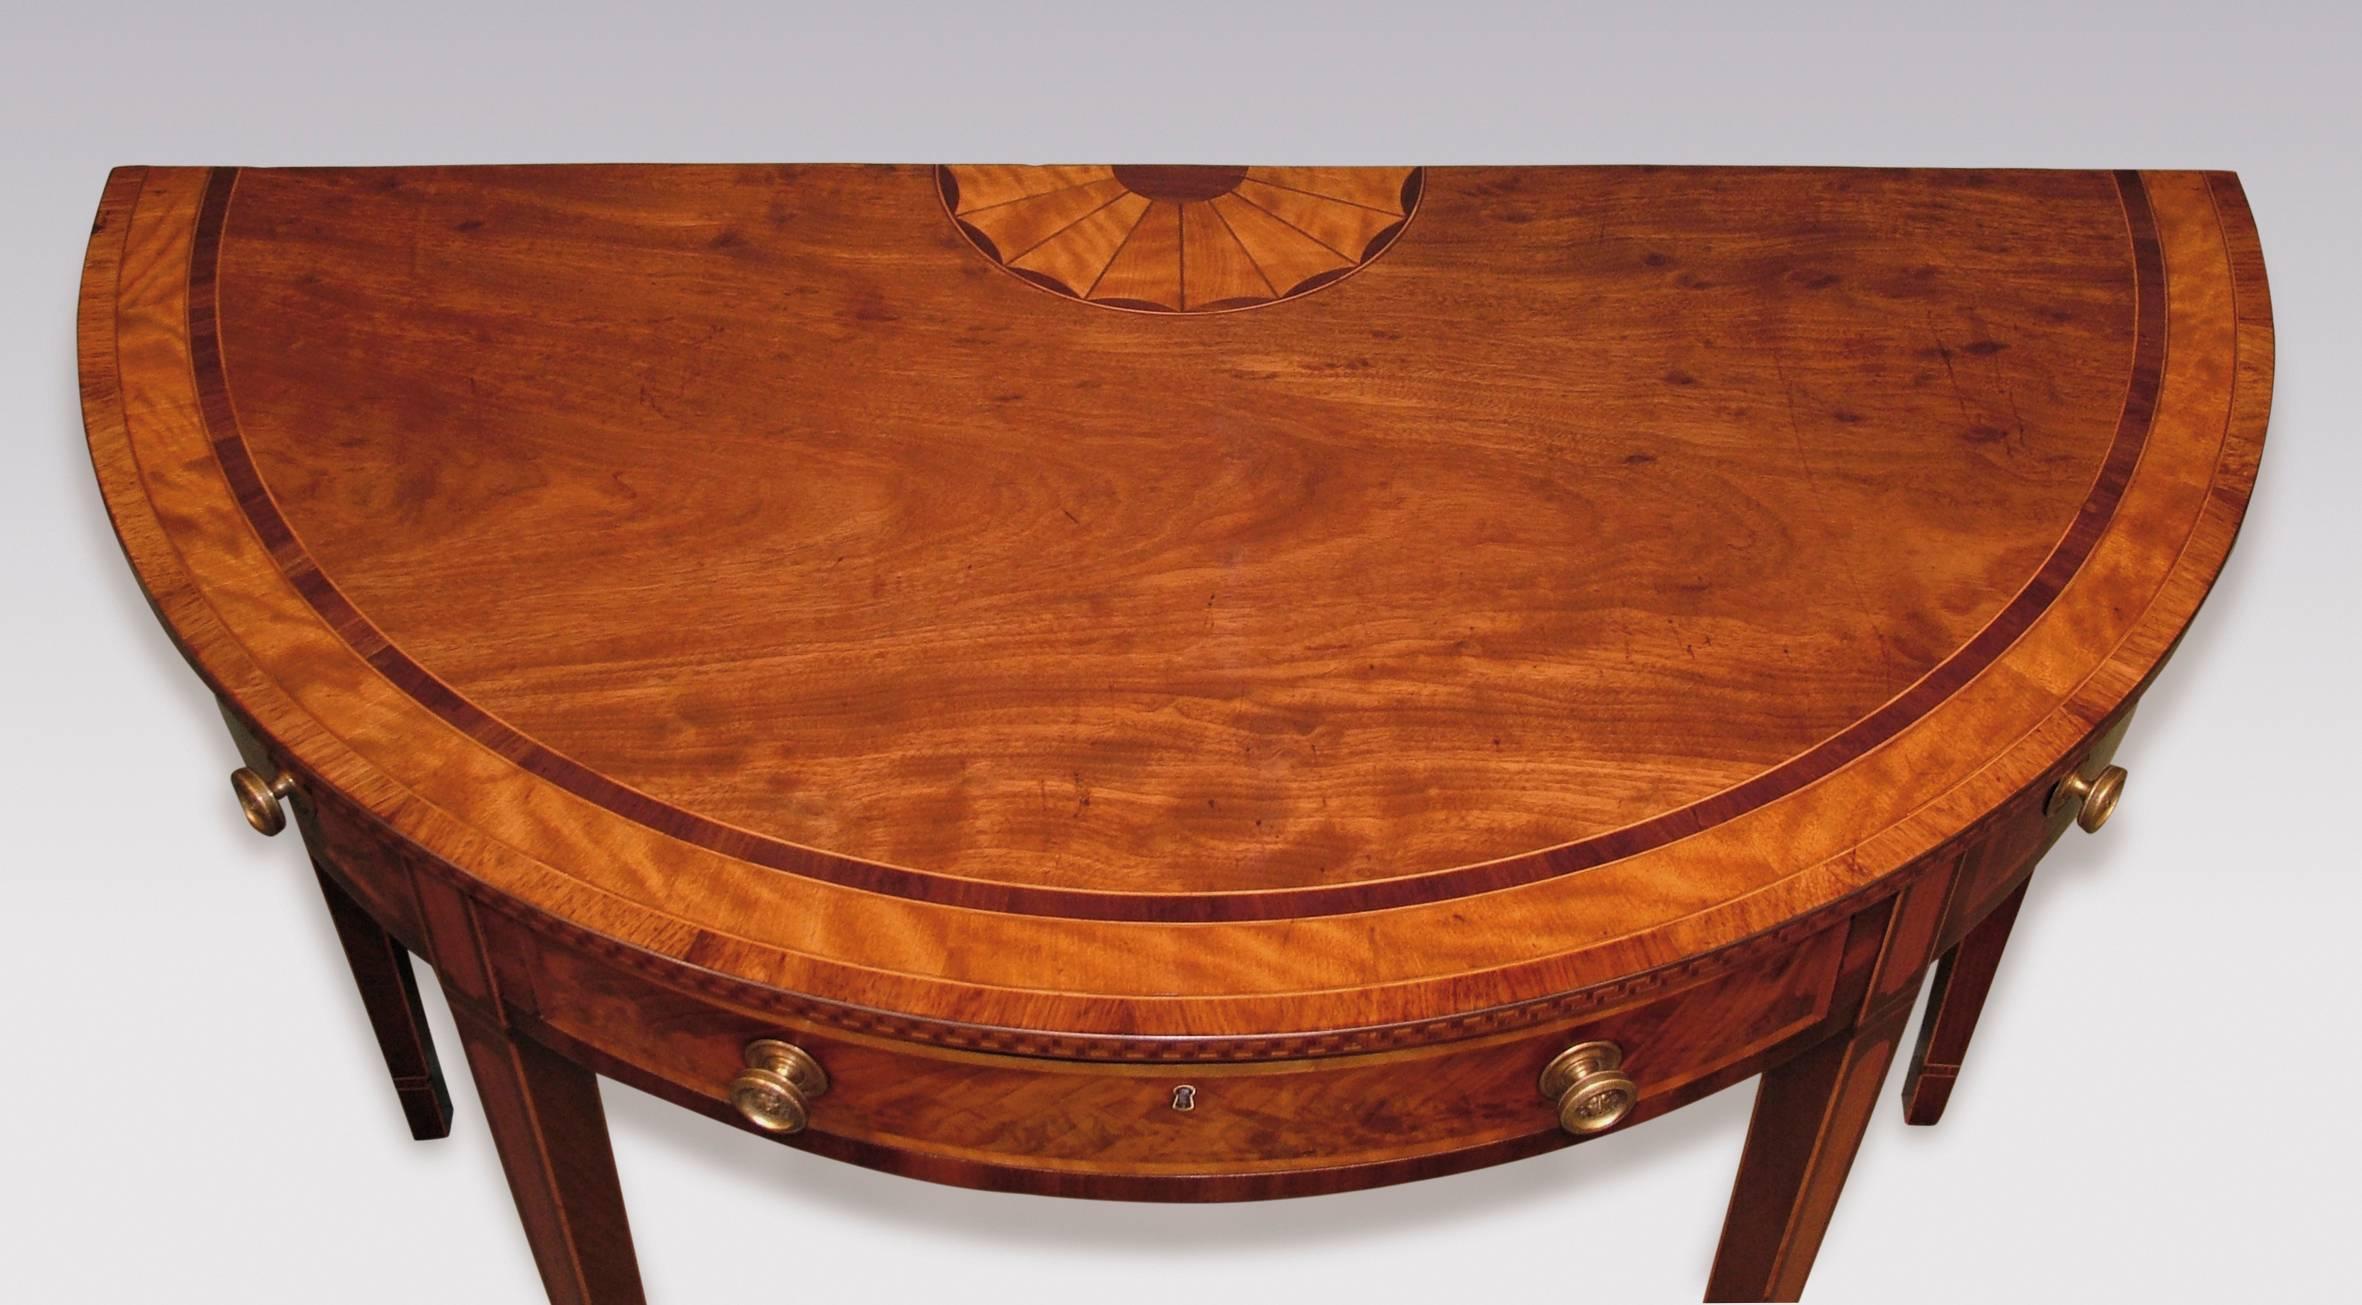 A late 18th century sheraton period mahogany side table, having purple heart, satinwood and tulipwood crossbanded half round top with satinwood fan inlay to the rear and Greek key pattern to the edge. The Table having one real and two dummy